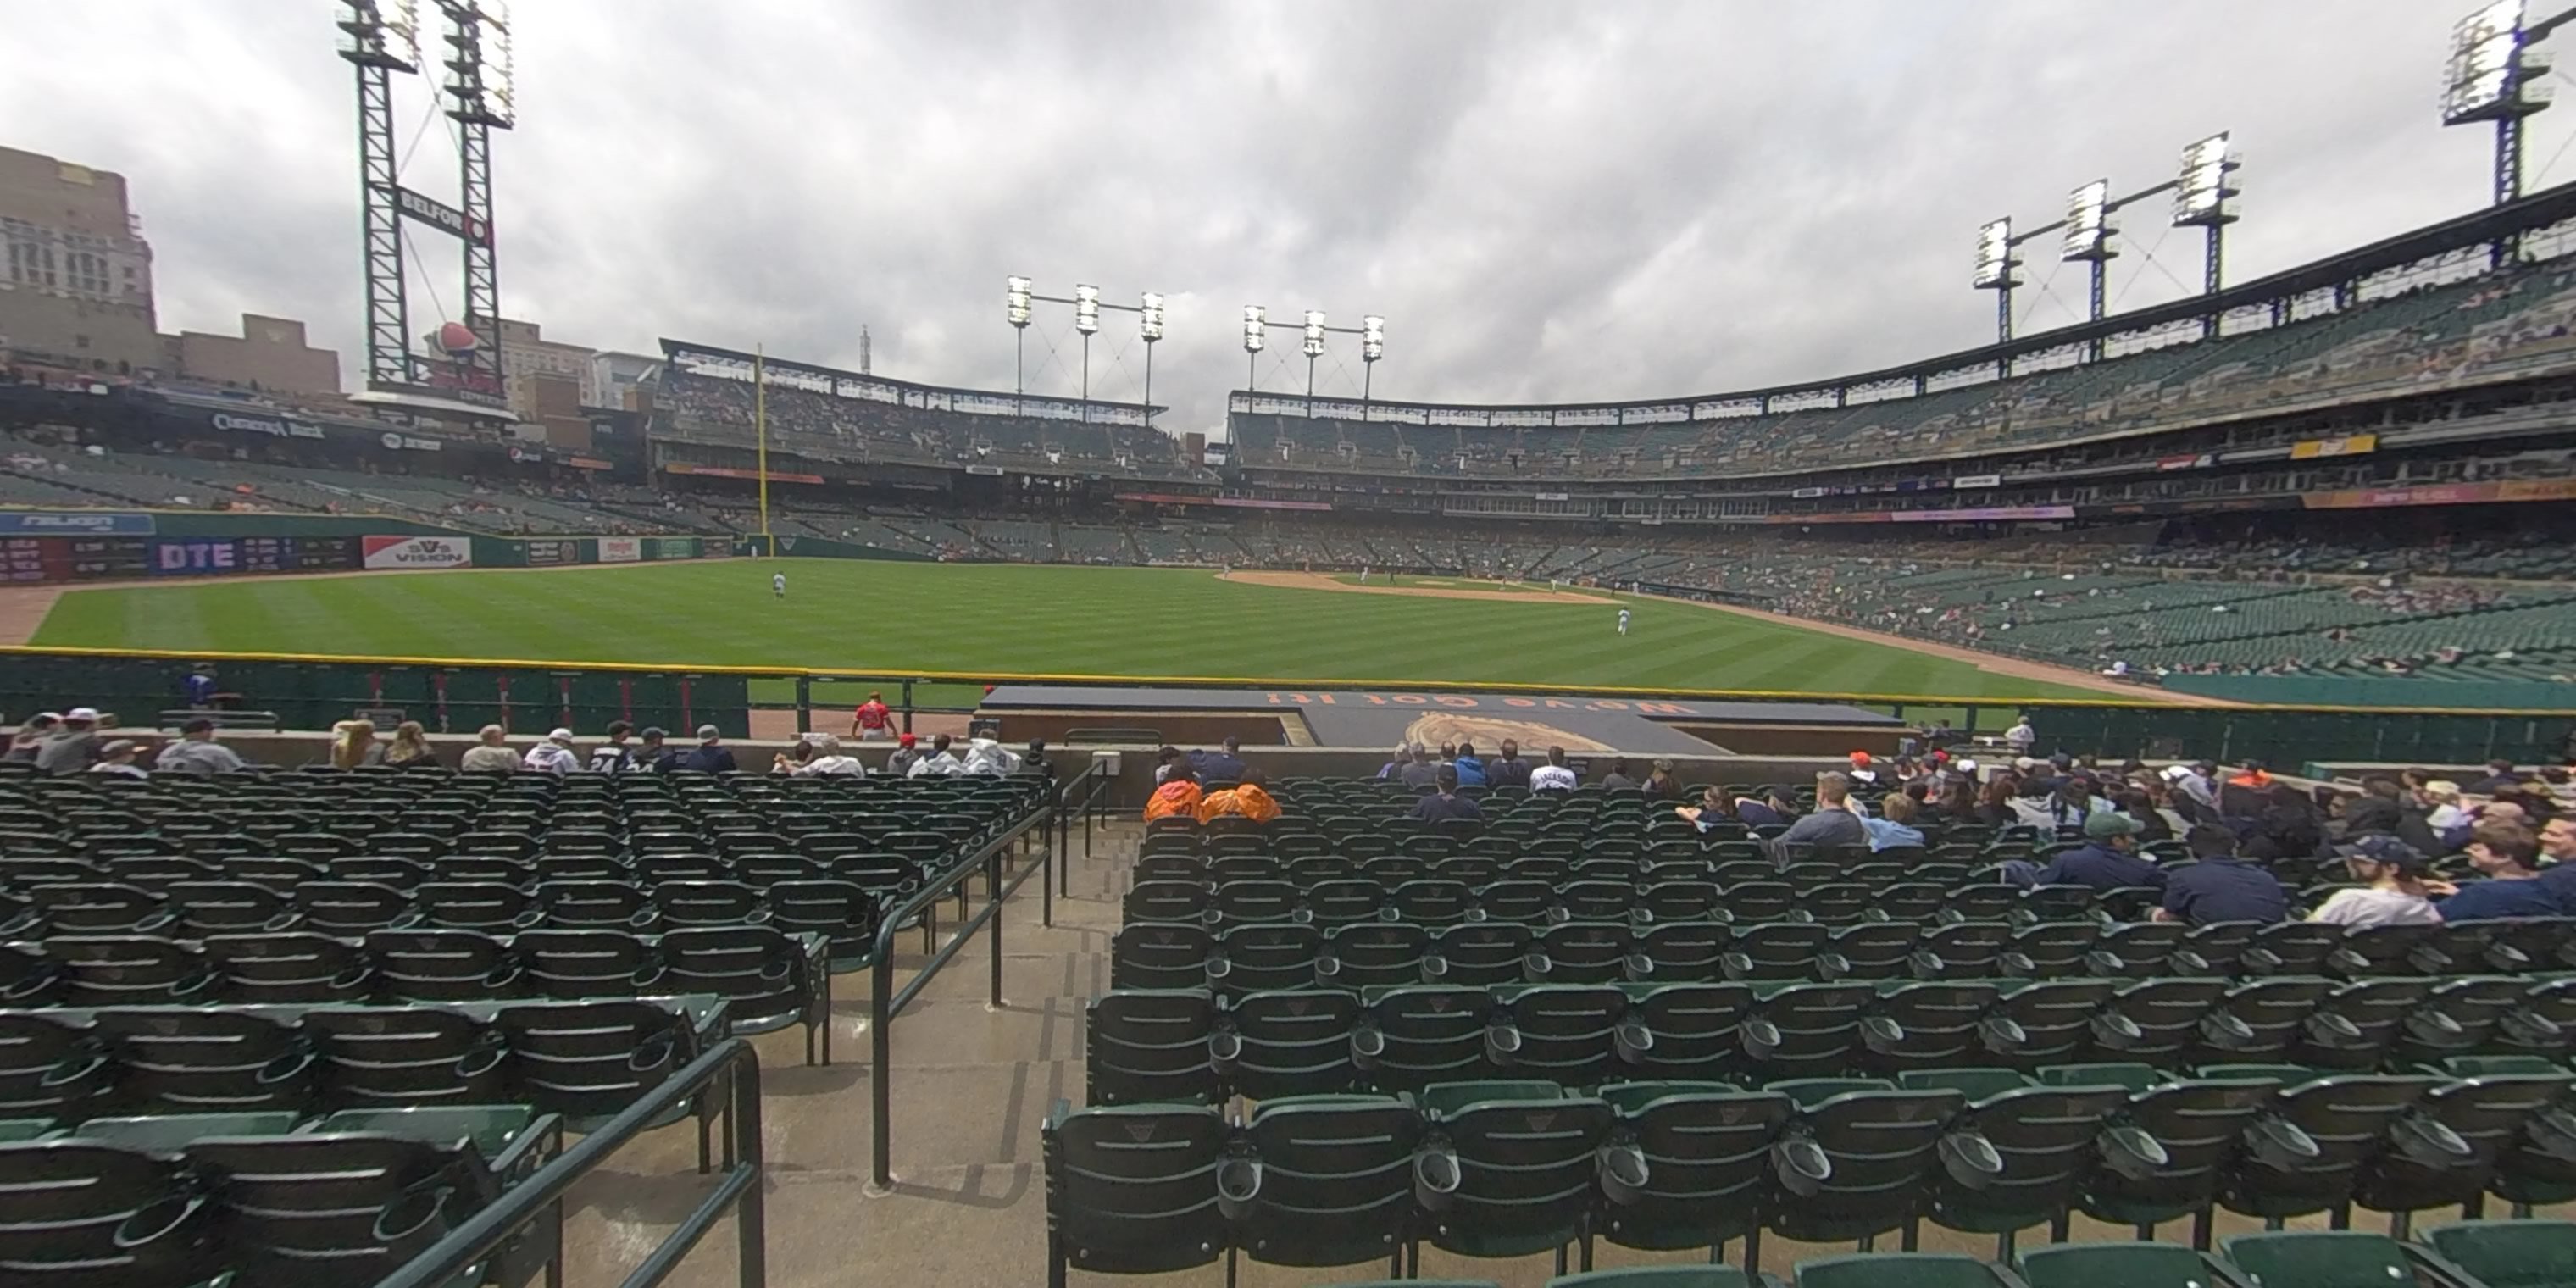 section 149 panoramic seat view  for baseball - comerica park